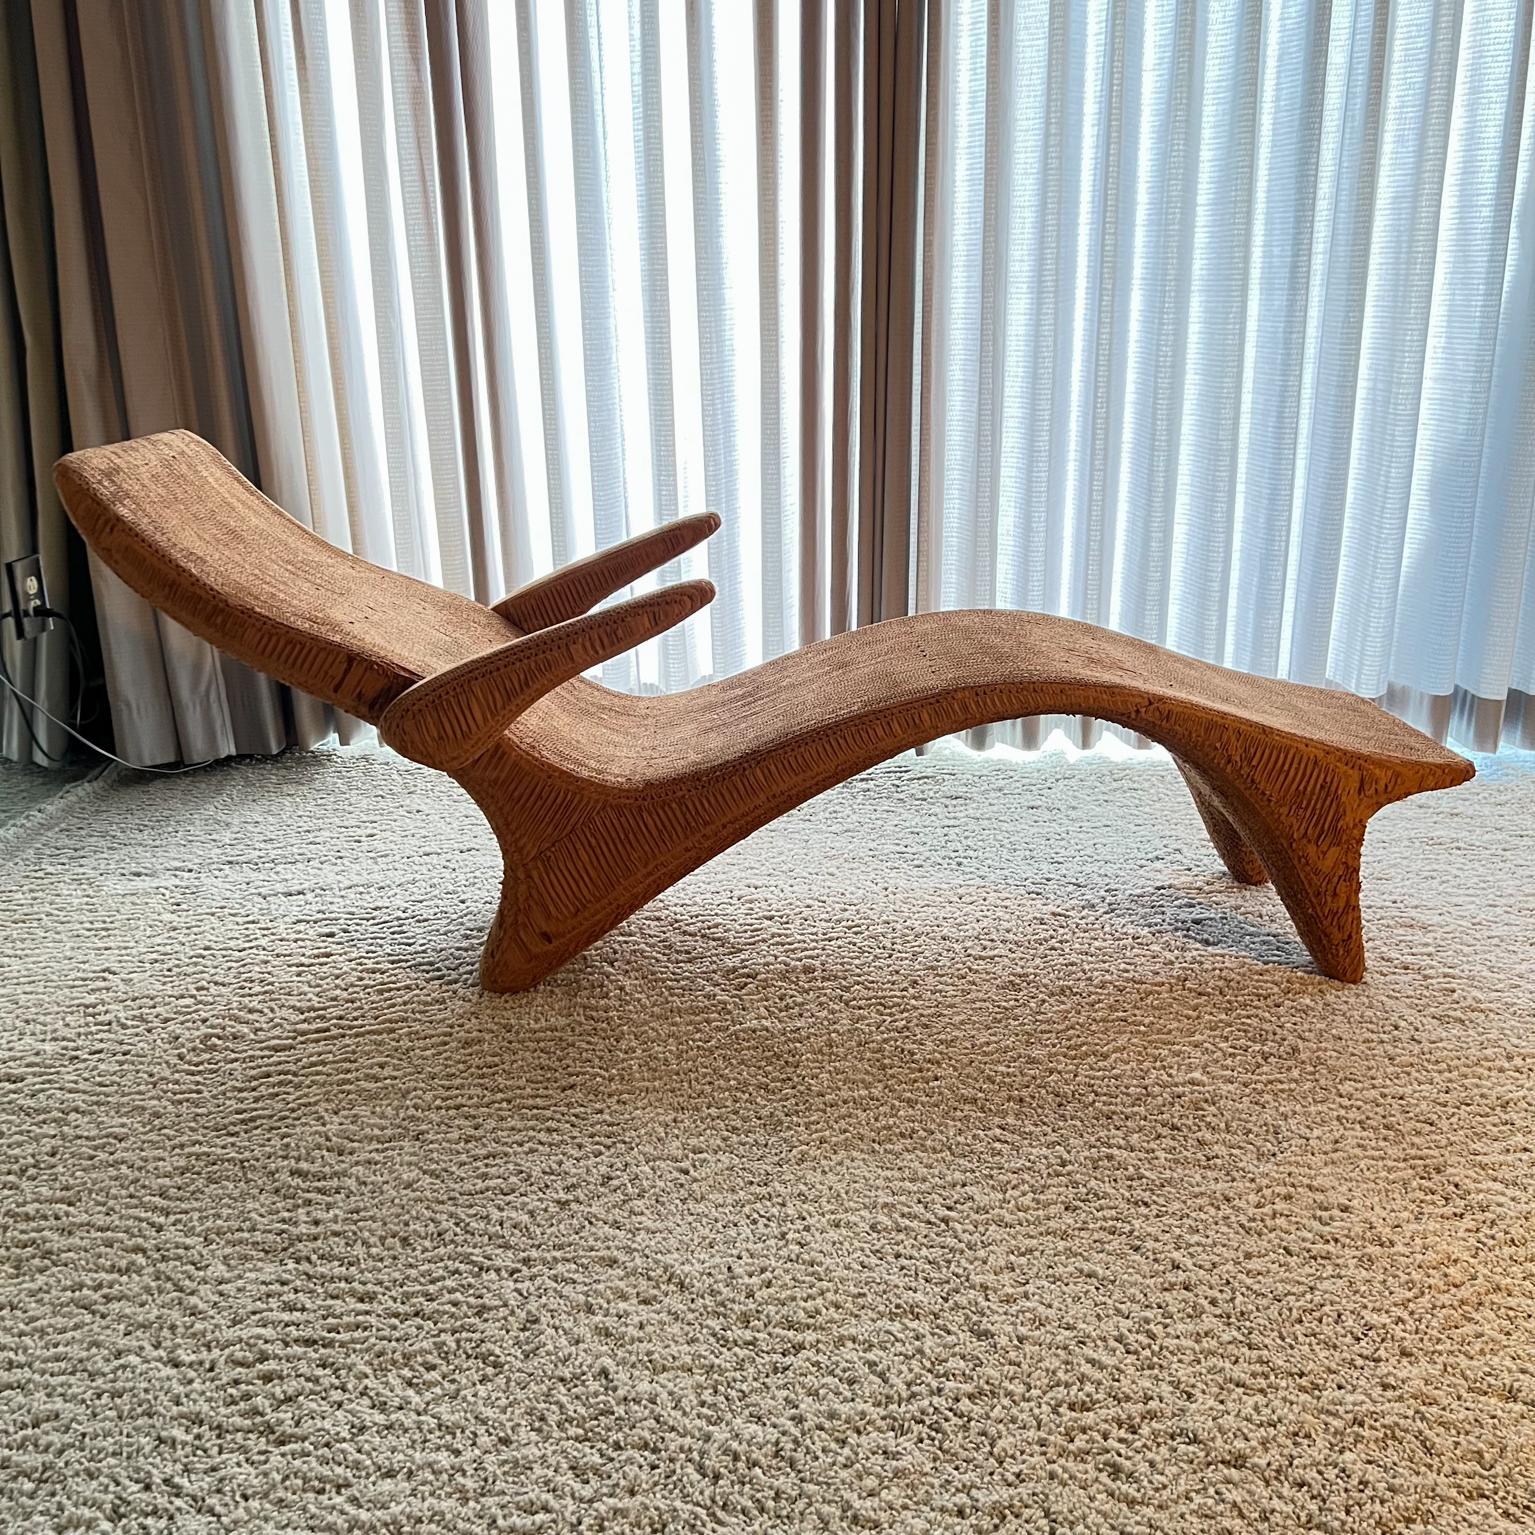  1970s Chaise Lounge LA Art Chair Style of Frank Gehry  For Sale 8